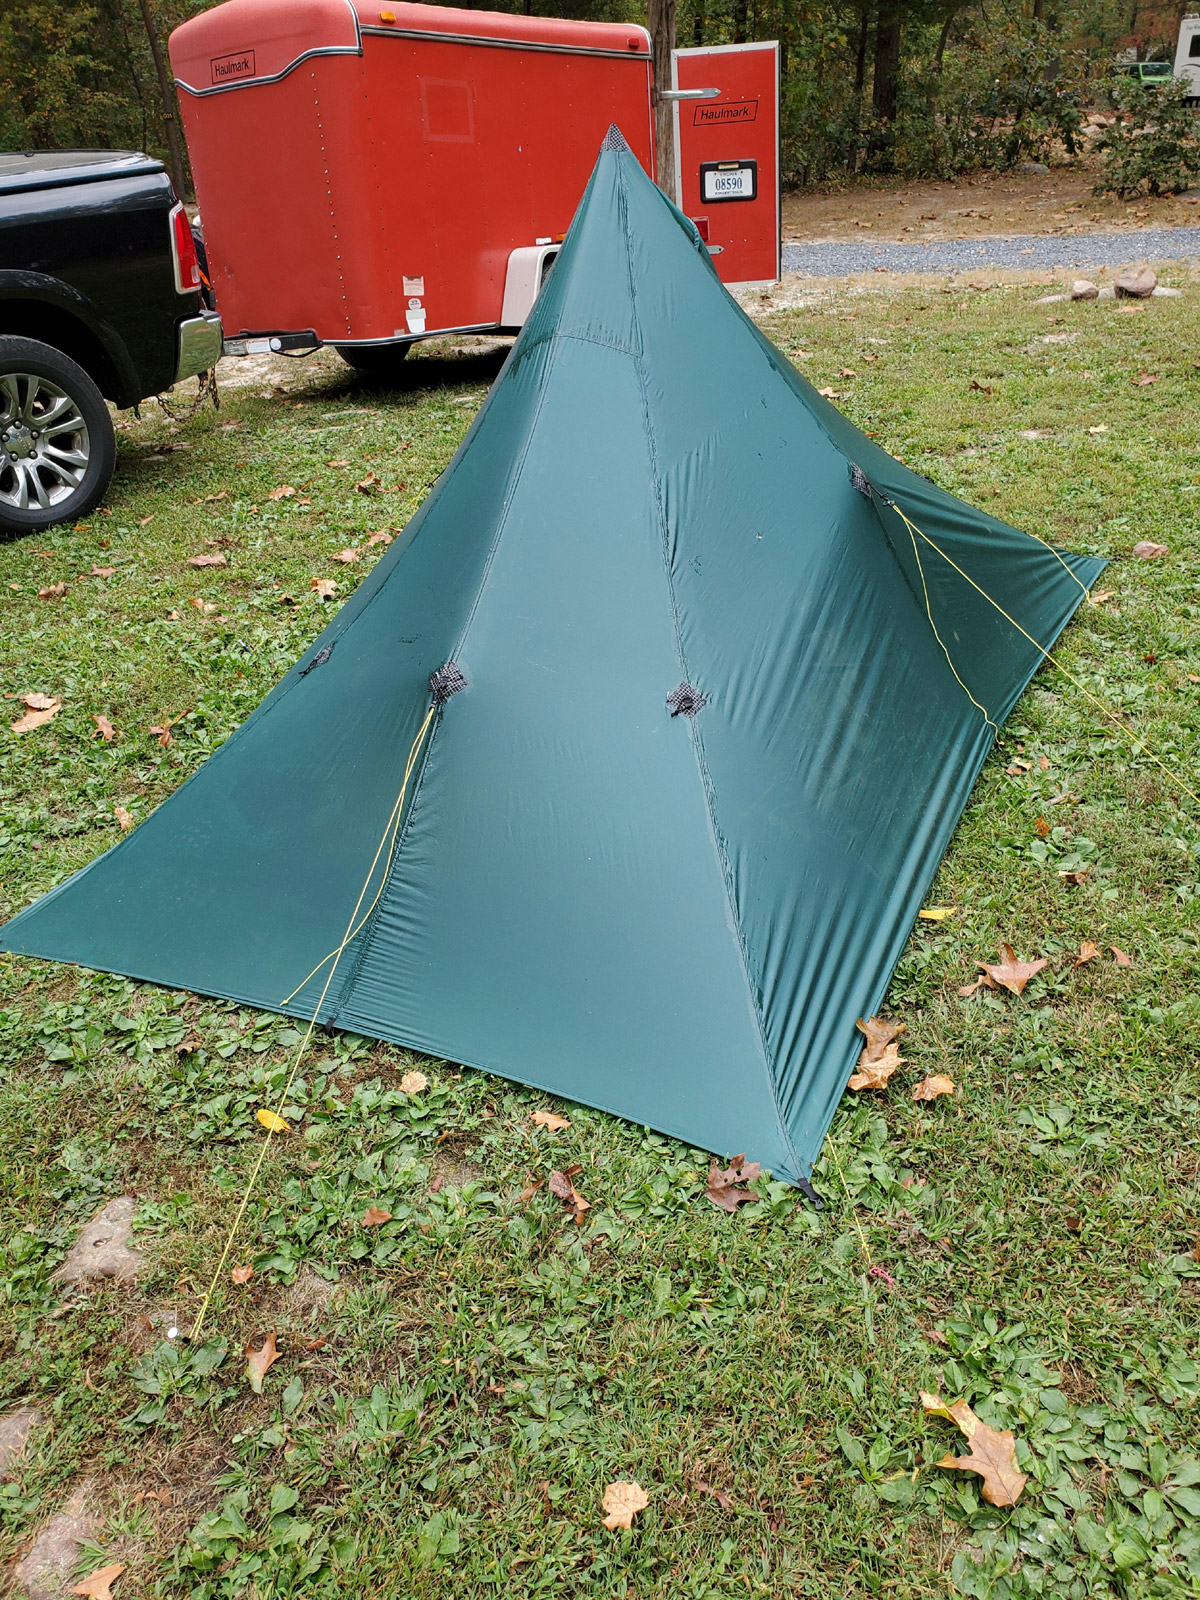 Locus Gear Hapi Grande Quick Review - Backpacking Light